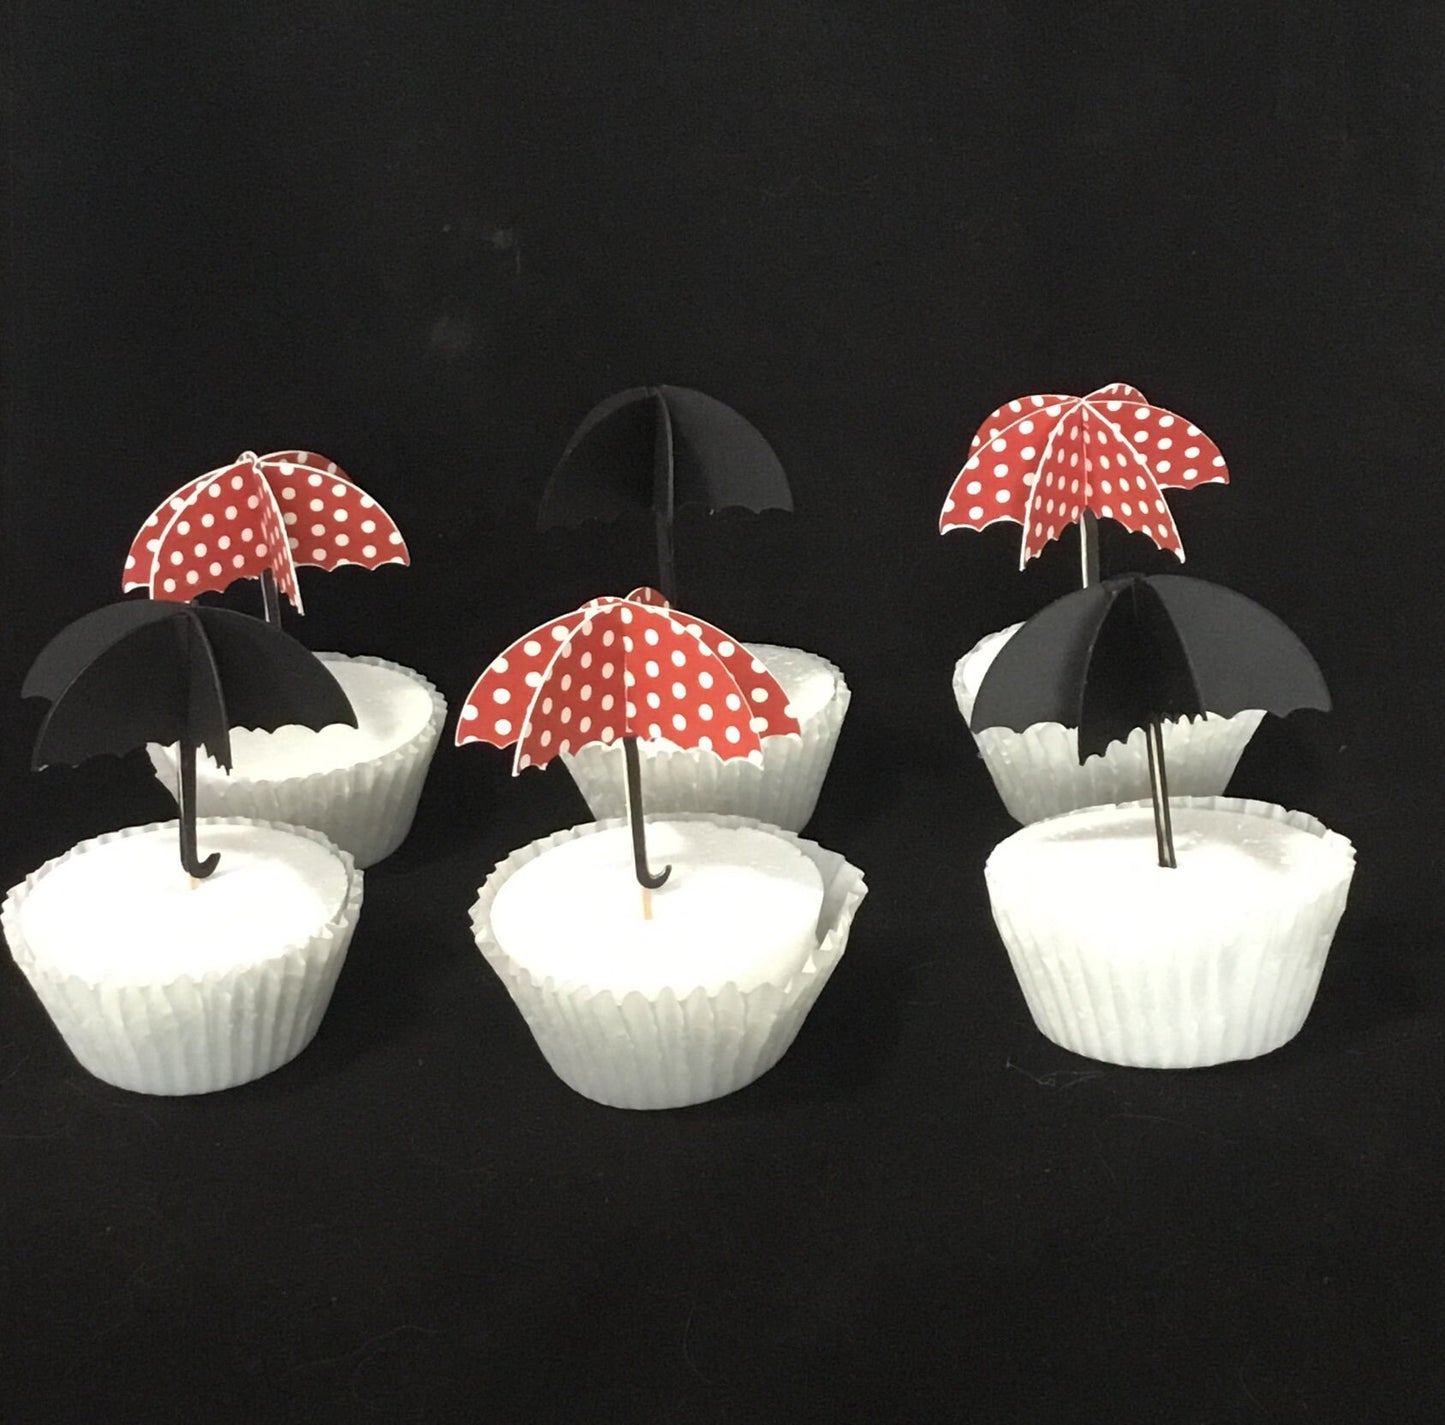 Mary Poppins Inspired Cupcake Toppers/ Baby shower cupcake toppers - Set of 12 cupcake toppers